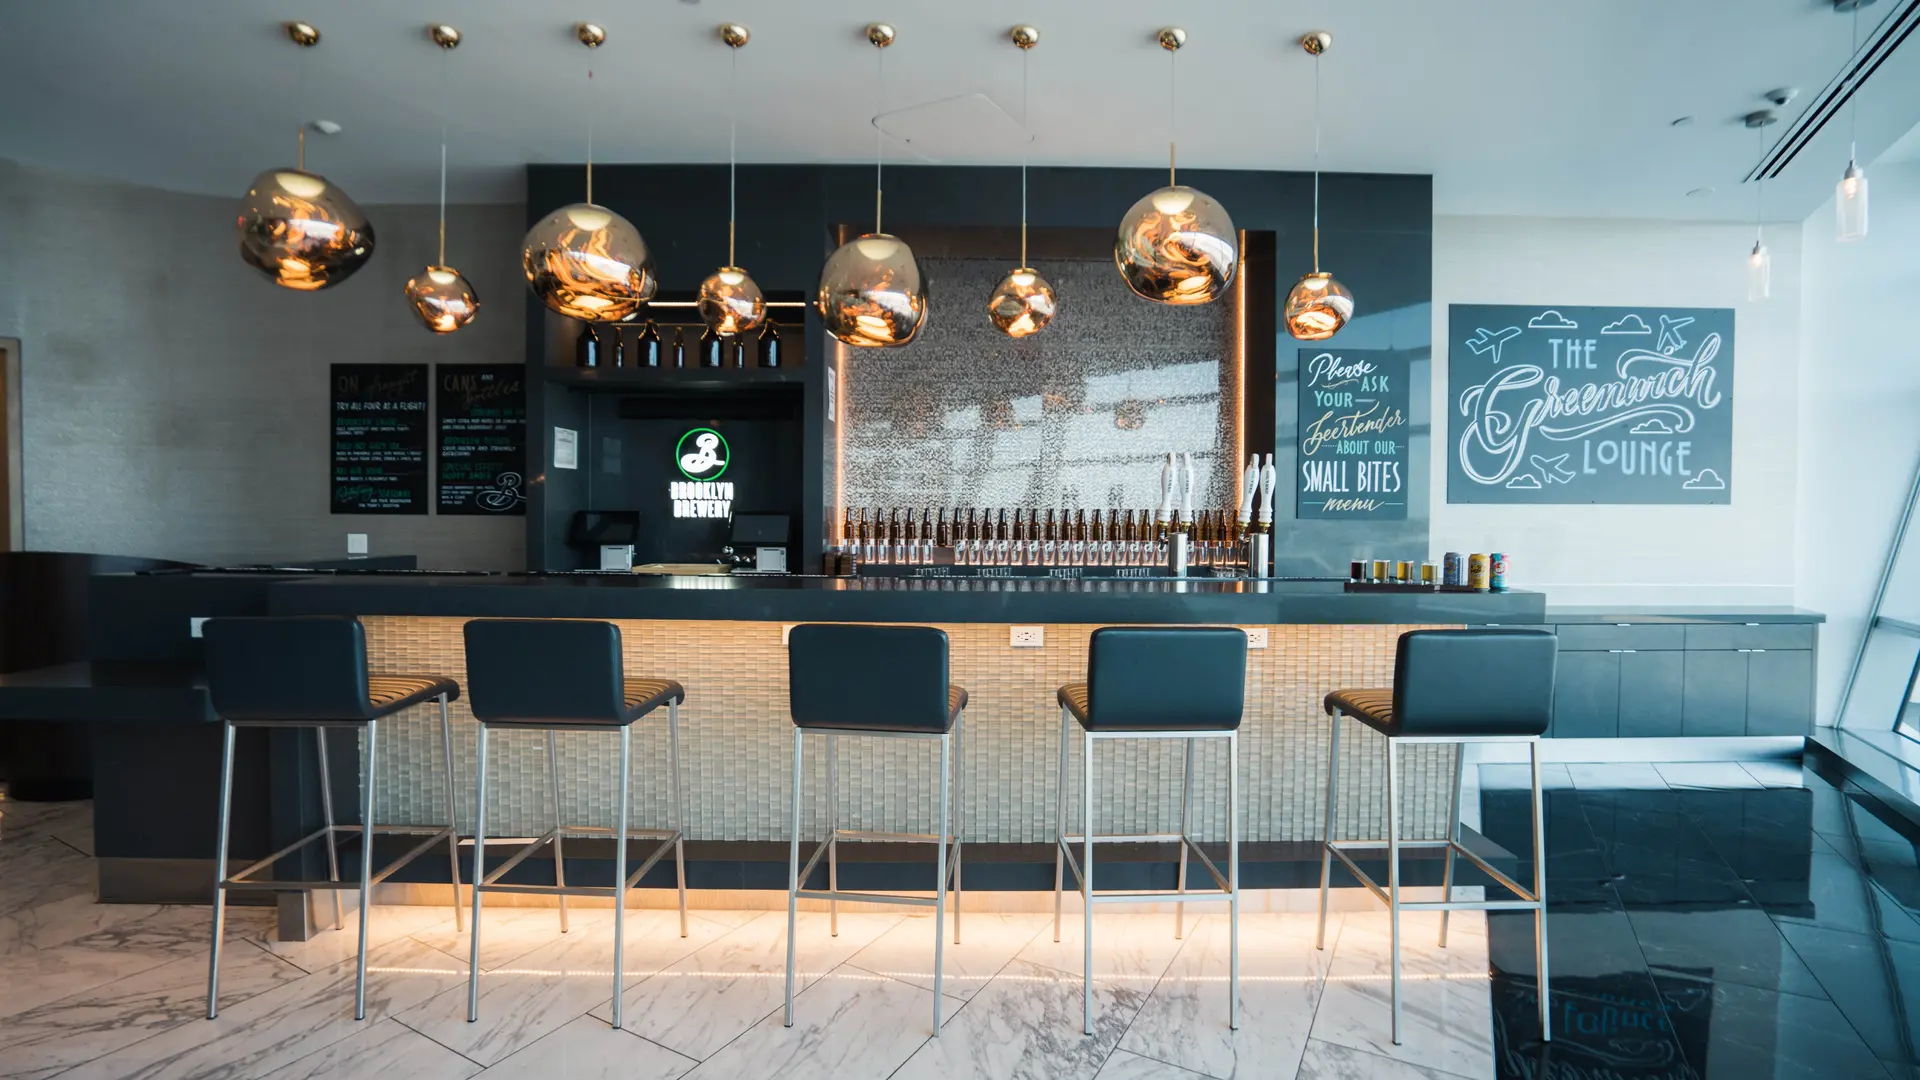 Airlines News - Hollywood comes to the new BA/AA bar at JFK